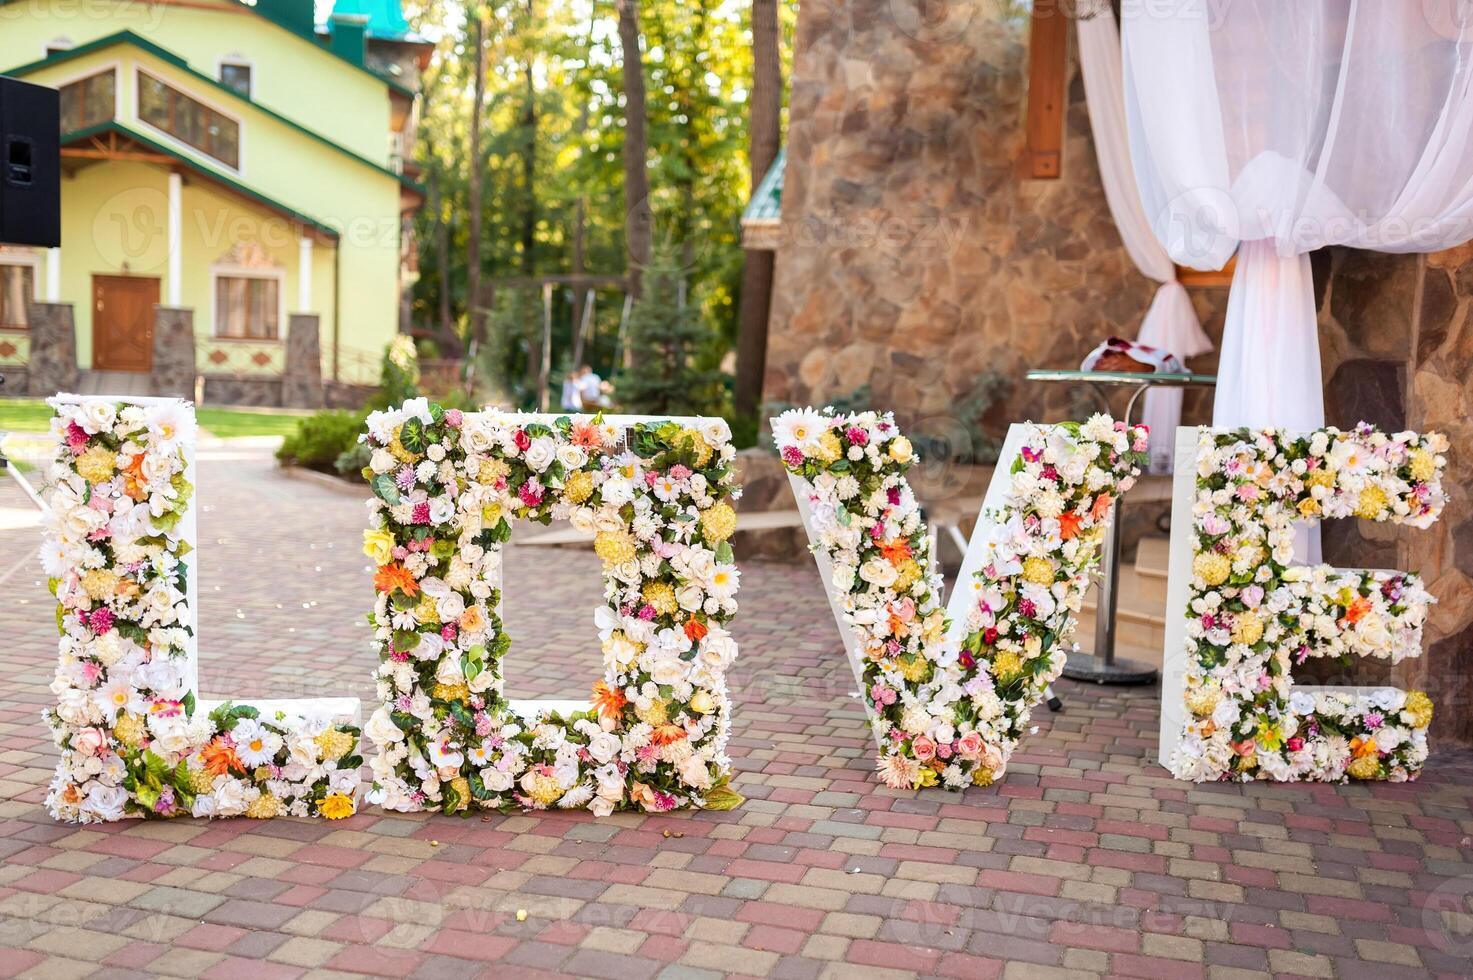 Decorated for wedding ceremony. Word love decorated of flowers at wedding ceremony photo